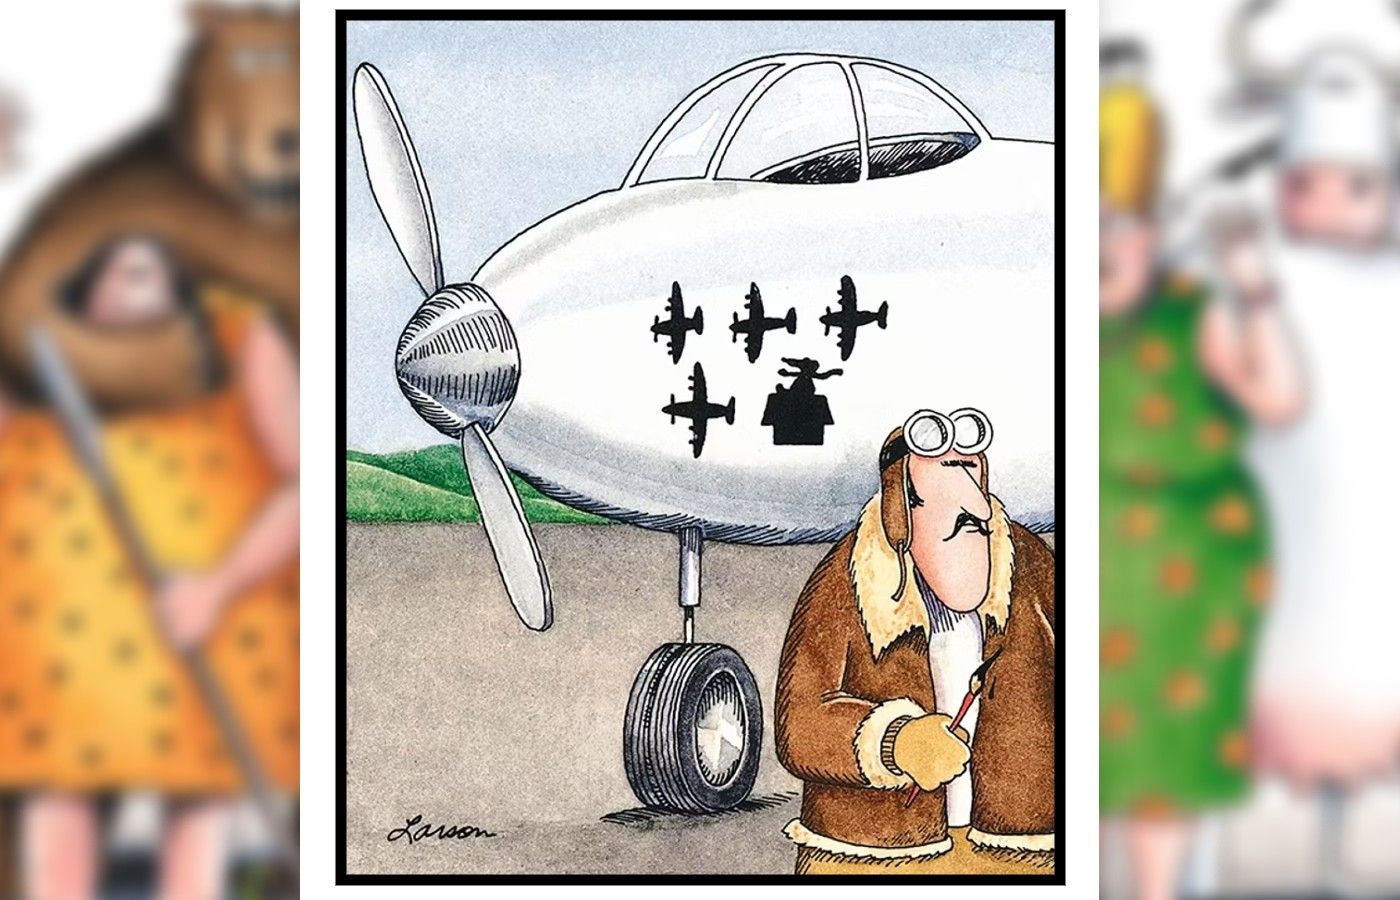 far side comic about a fighter pilot